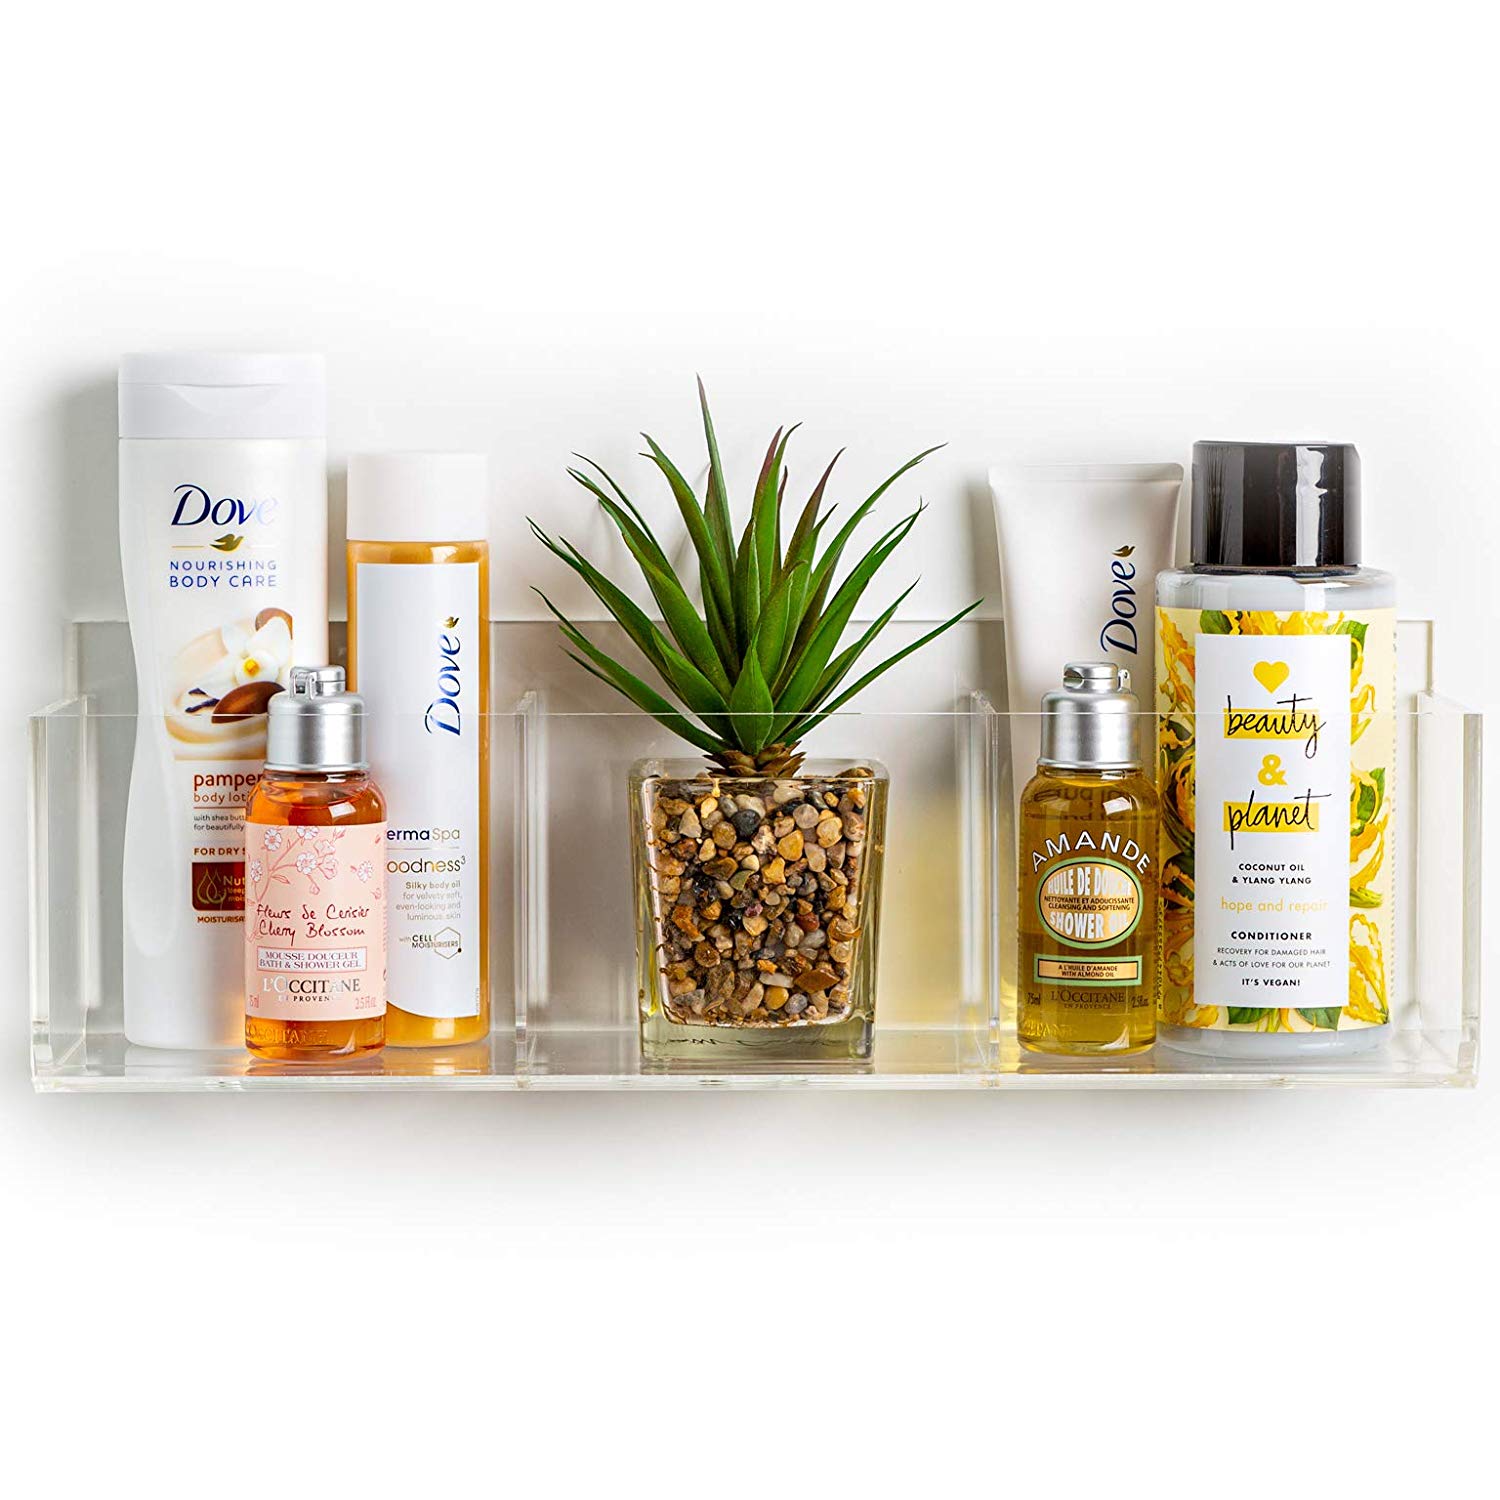 Invisible' Bathroom Organizer Wall Mounted or Free-Standing Luxury Bathroom  Decor. 15” Clear Acrylic Bathroom Shelf with 3 Sections for Toiletries  Makeup Toothbrushes & Over The Toilet Storage - Pretty Display: Making Your